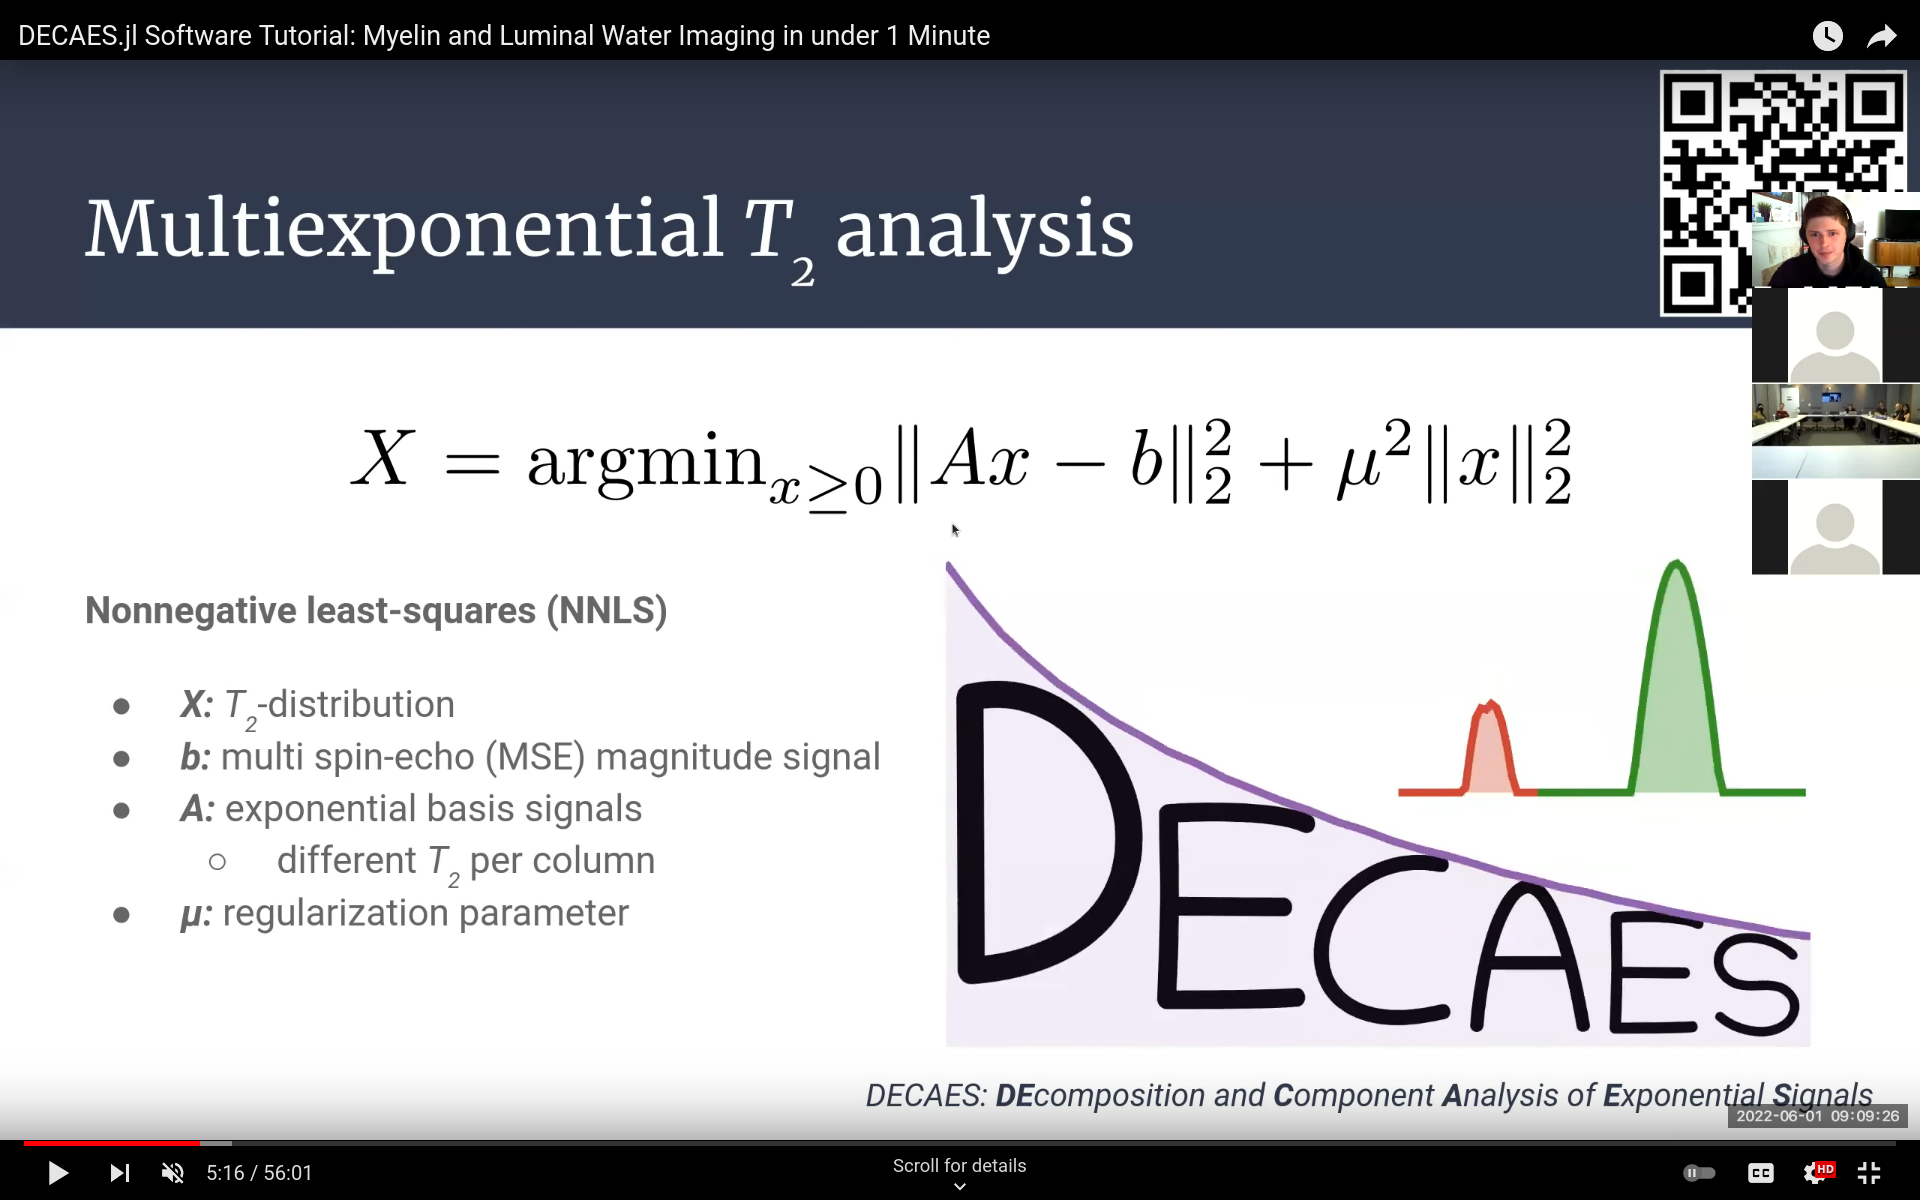 DECAES.jl Software Tutorial: Myelin and Luminal Water Imaging in under 1 Minute